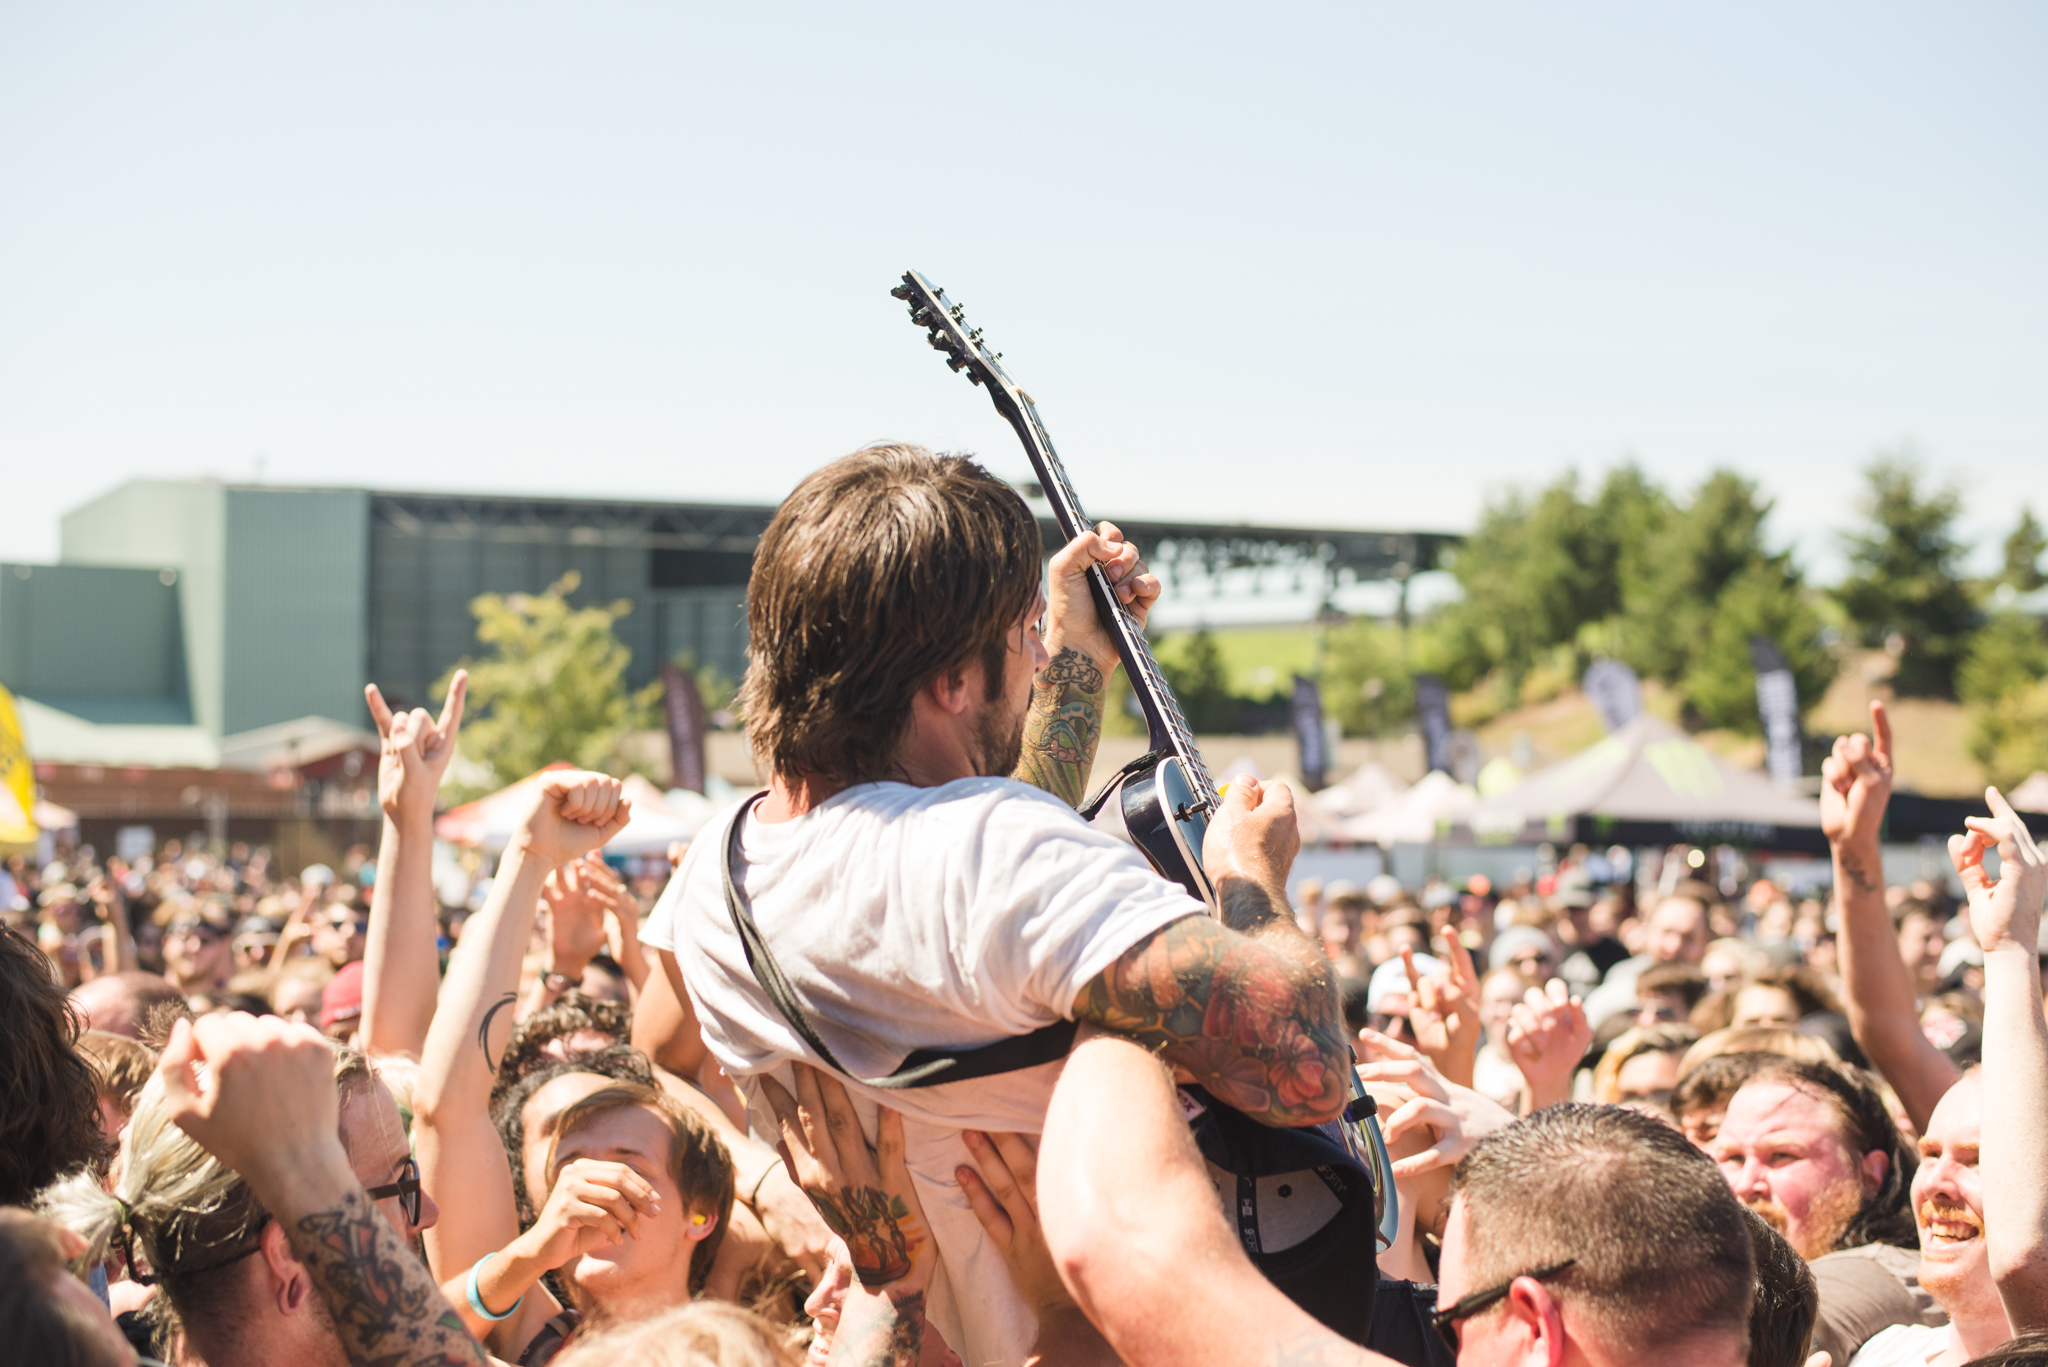 Every Time I Die - Photo by Lindsey Blane